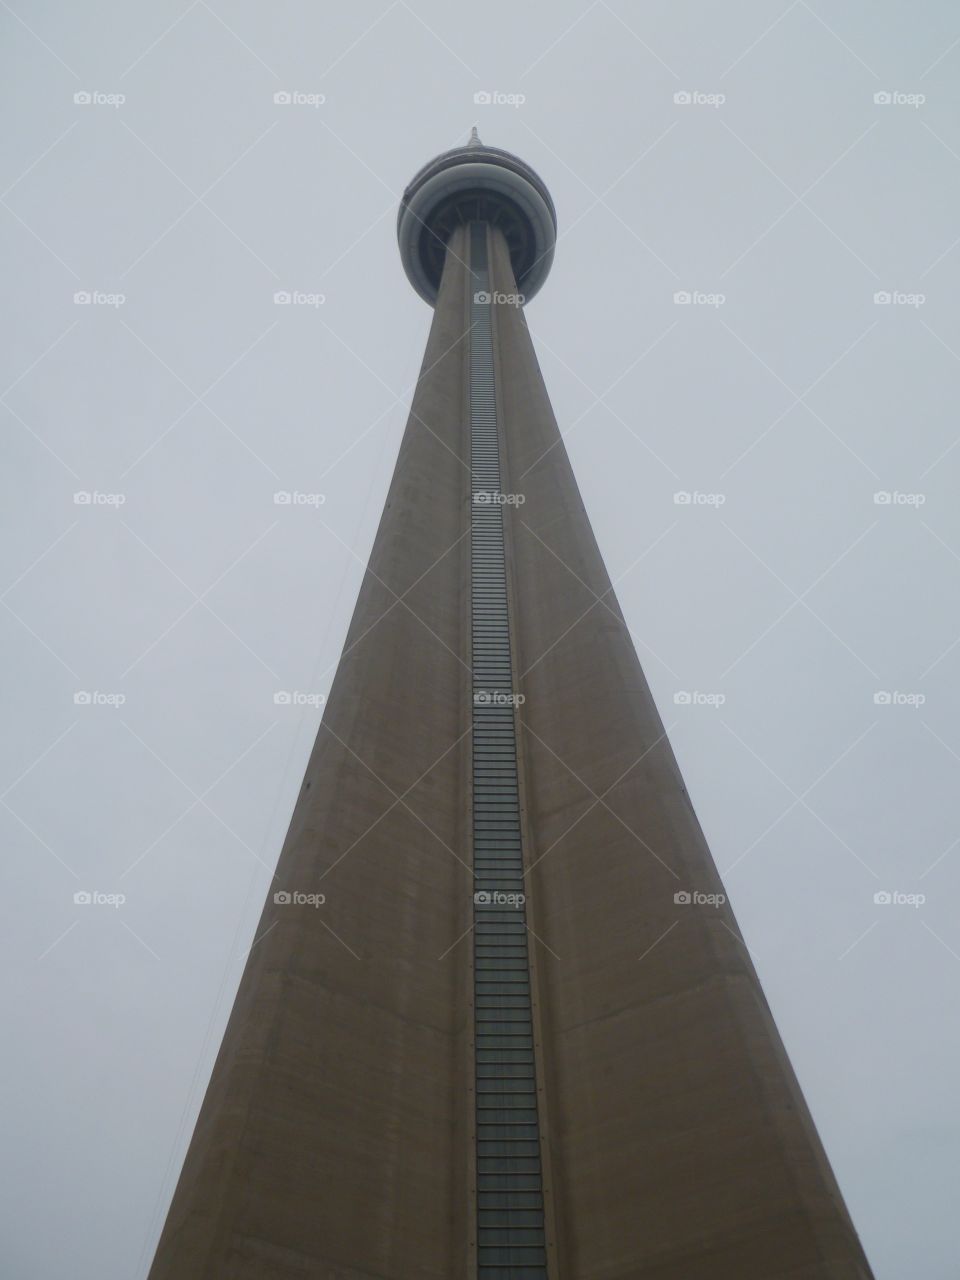 The CN tower 